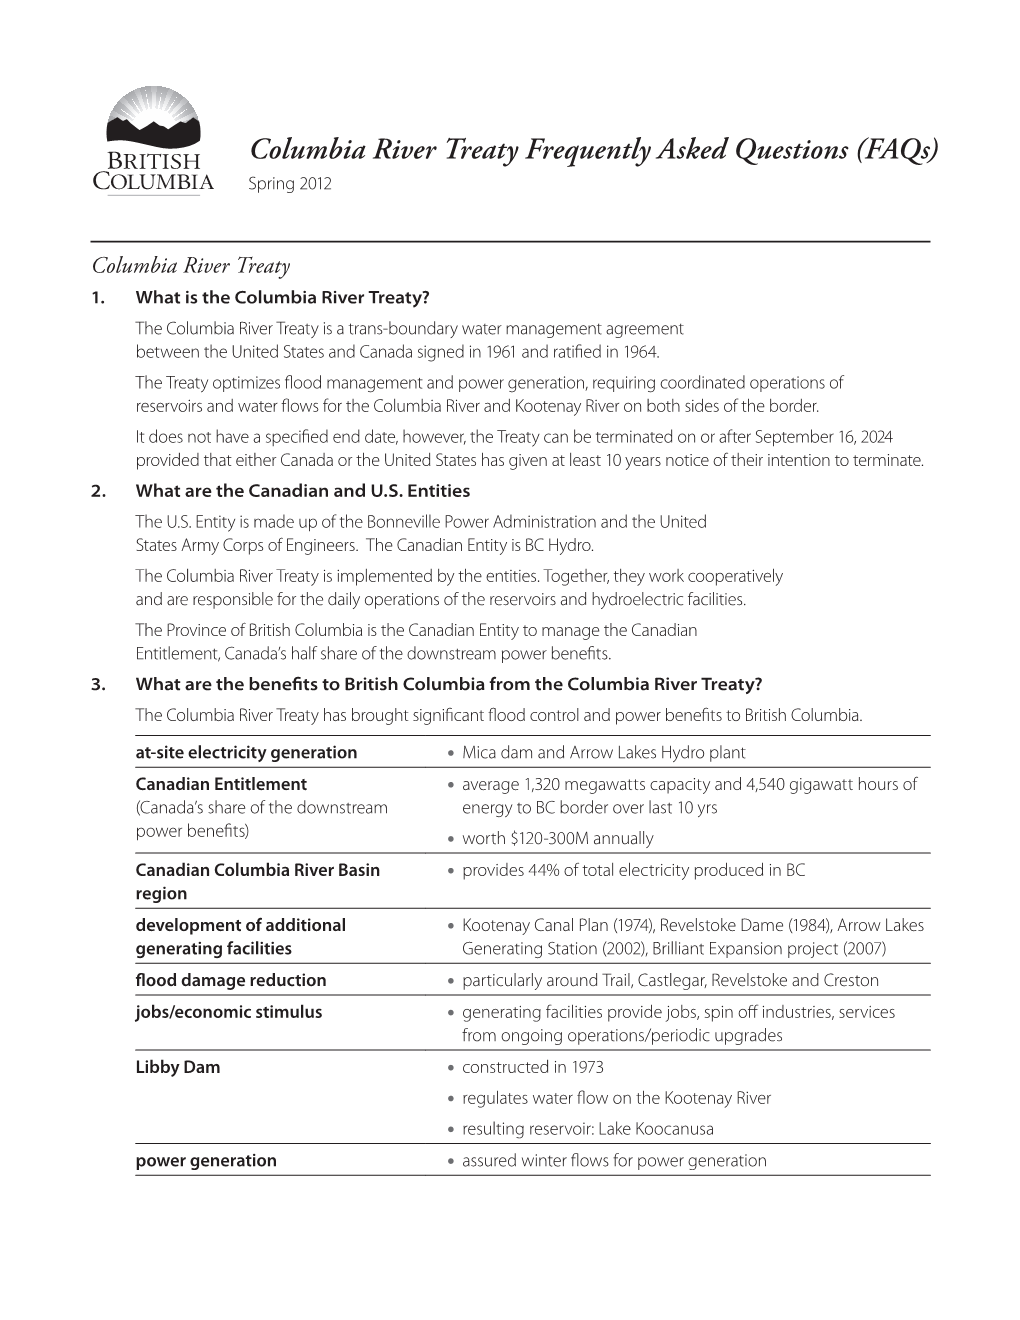 Columbia River Treaty Frequently Asked Questions (Faqs) Spring 2012